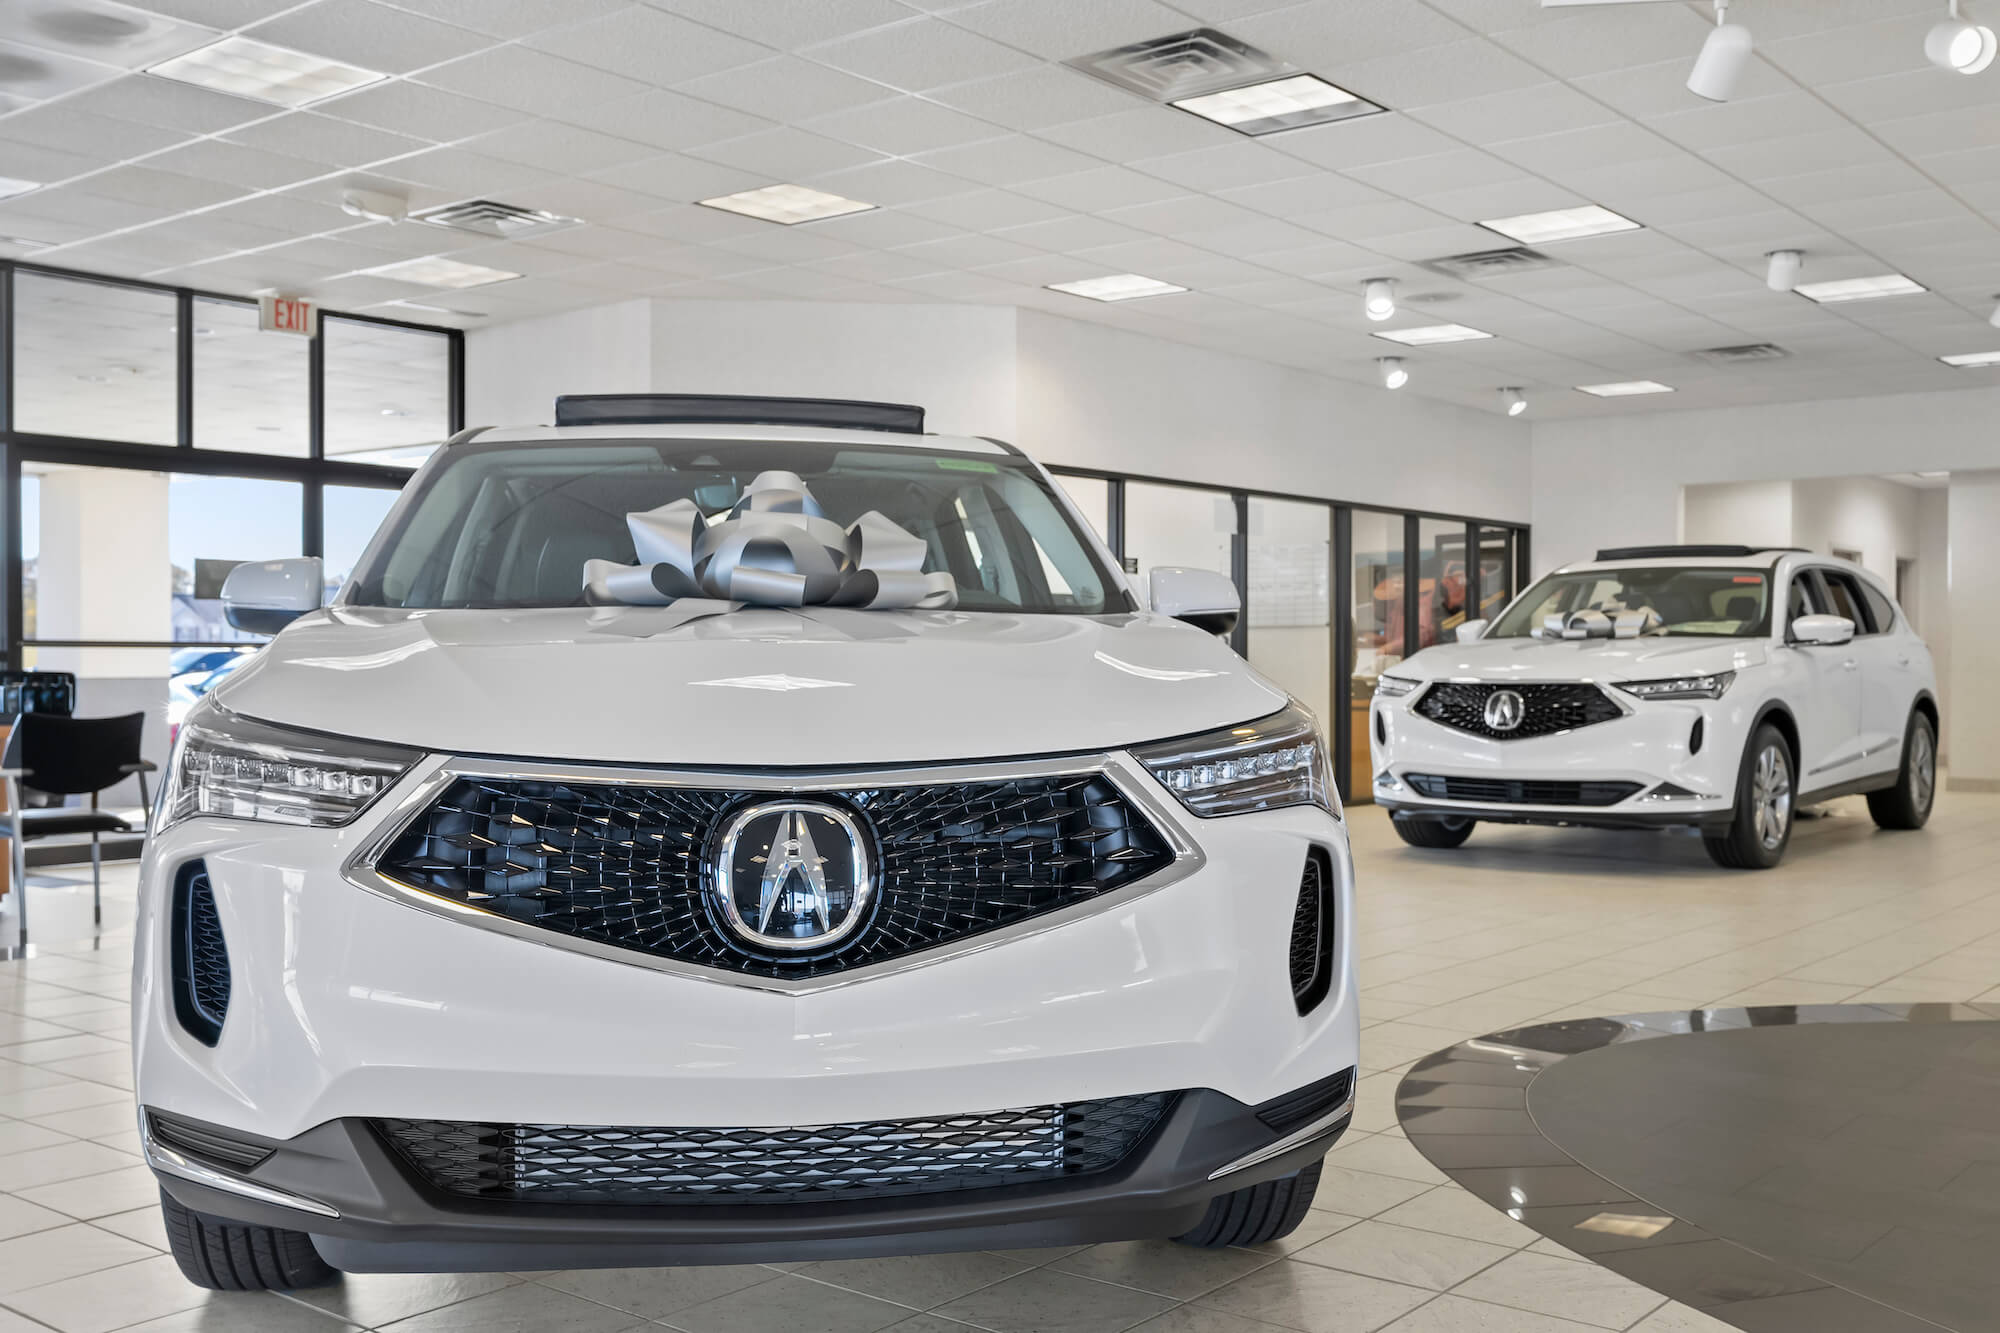 Fred Anderson Acura Showroom With Vehicles